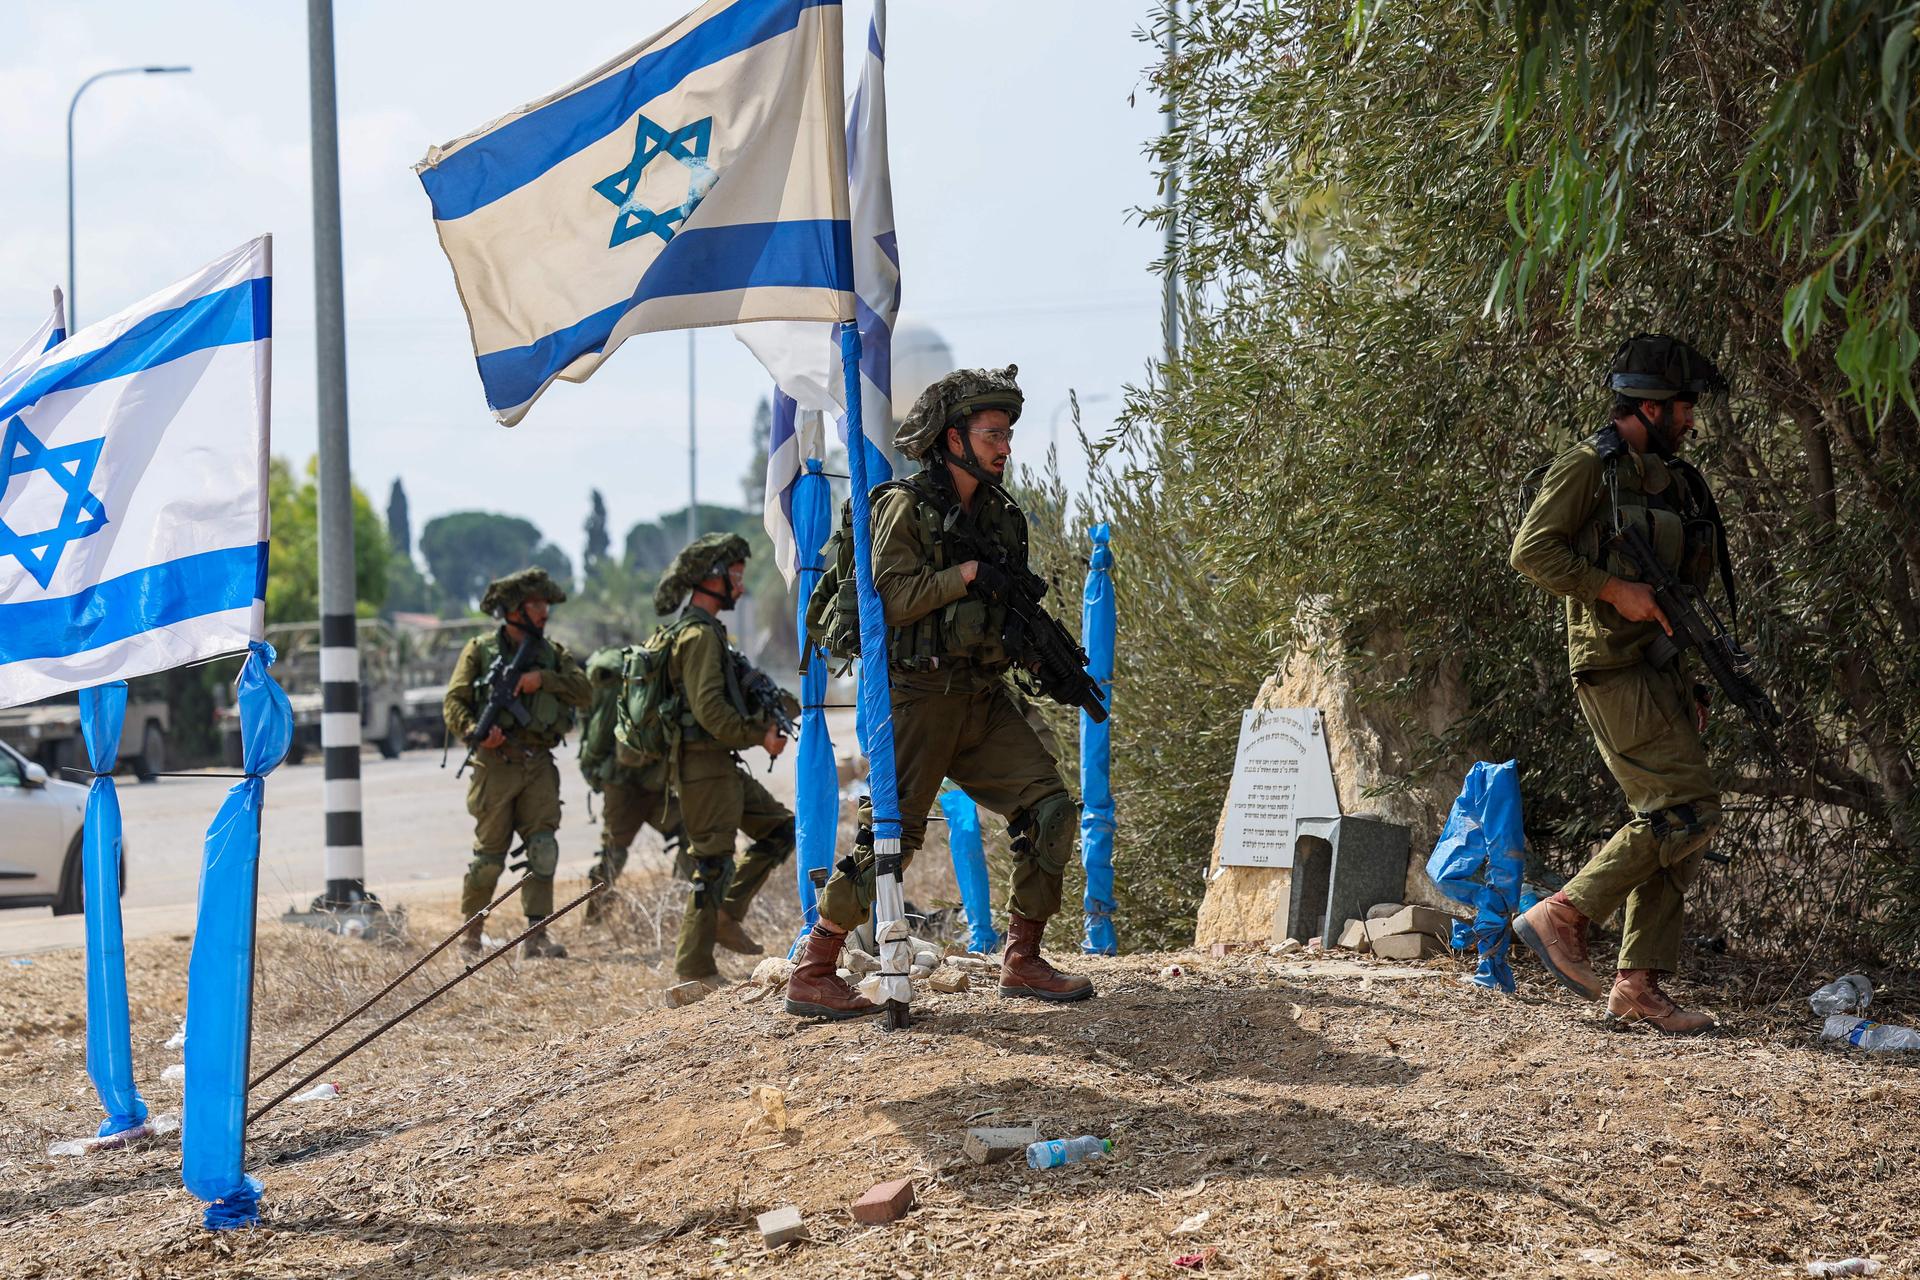 Israeli soldiers patrolled an area in Kfar Aza, which borders the Gaza Strip, on Tuesday. (JACK GUEZ/AFP via Getty Images)